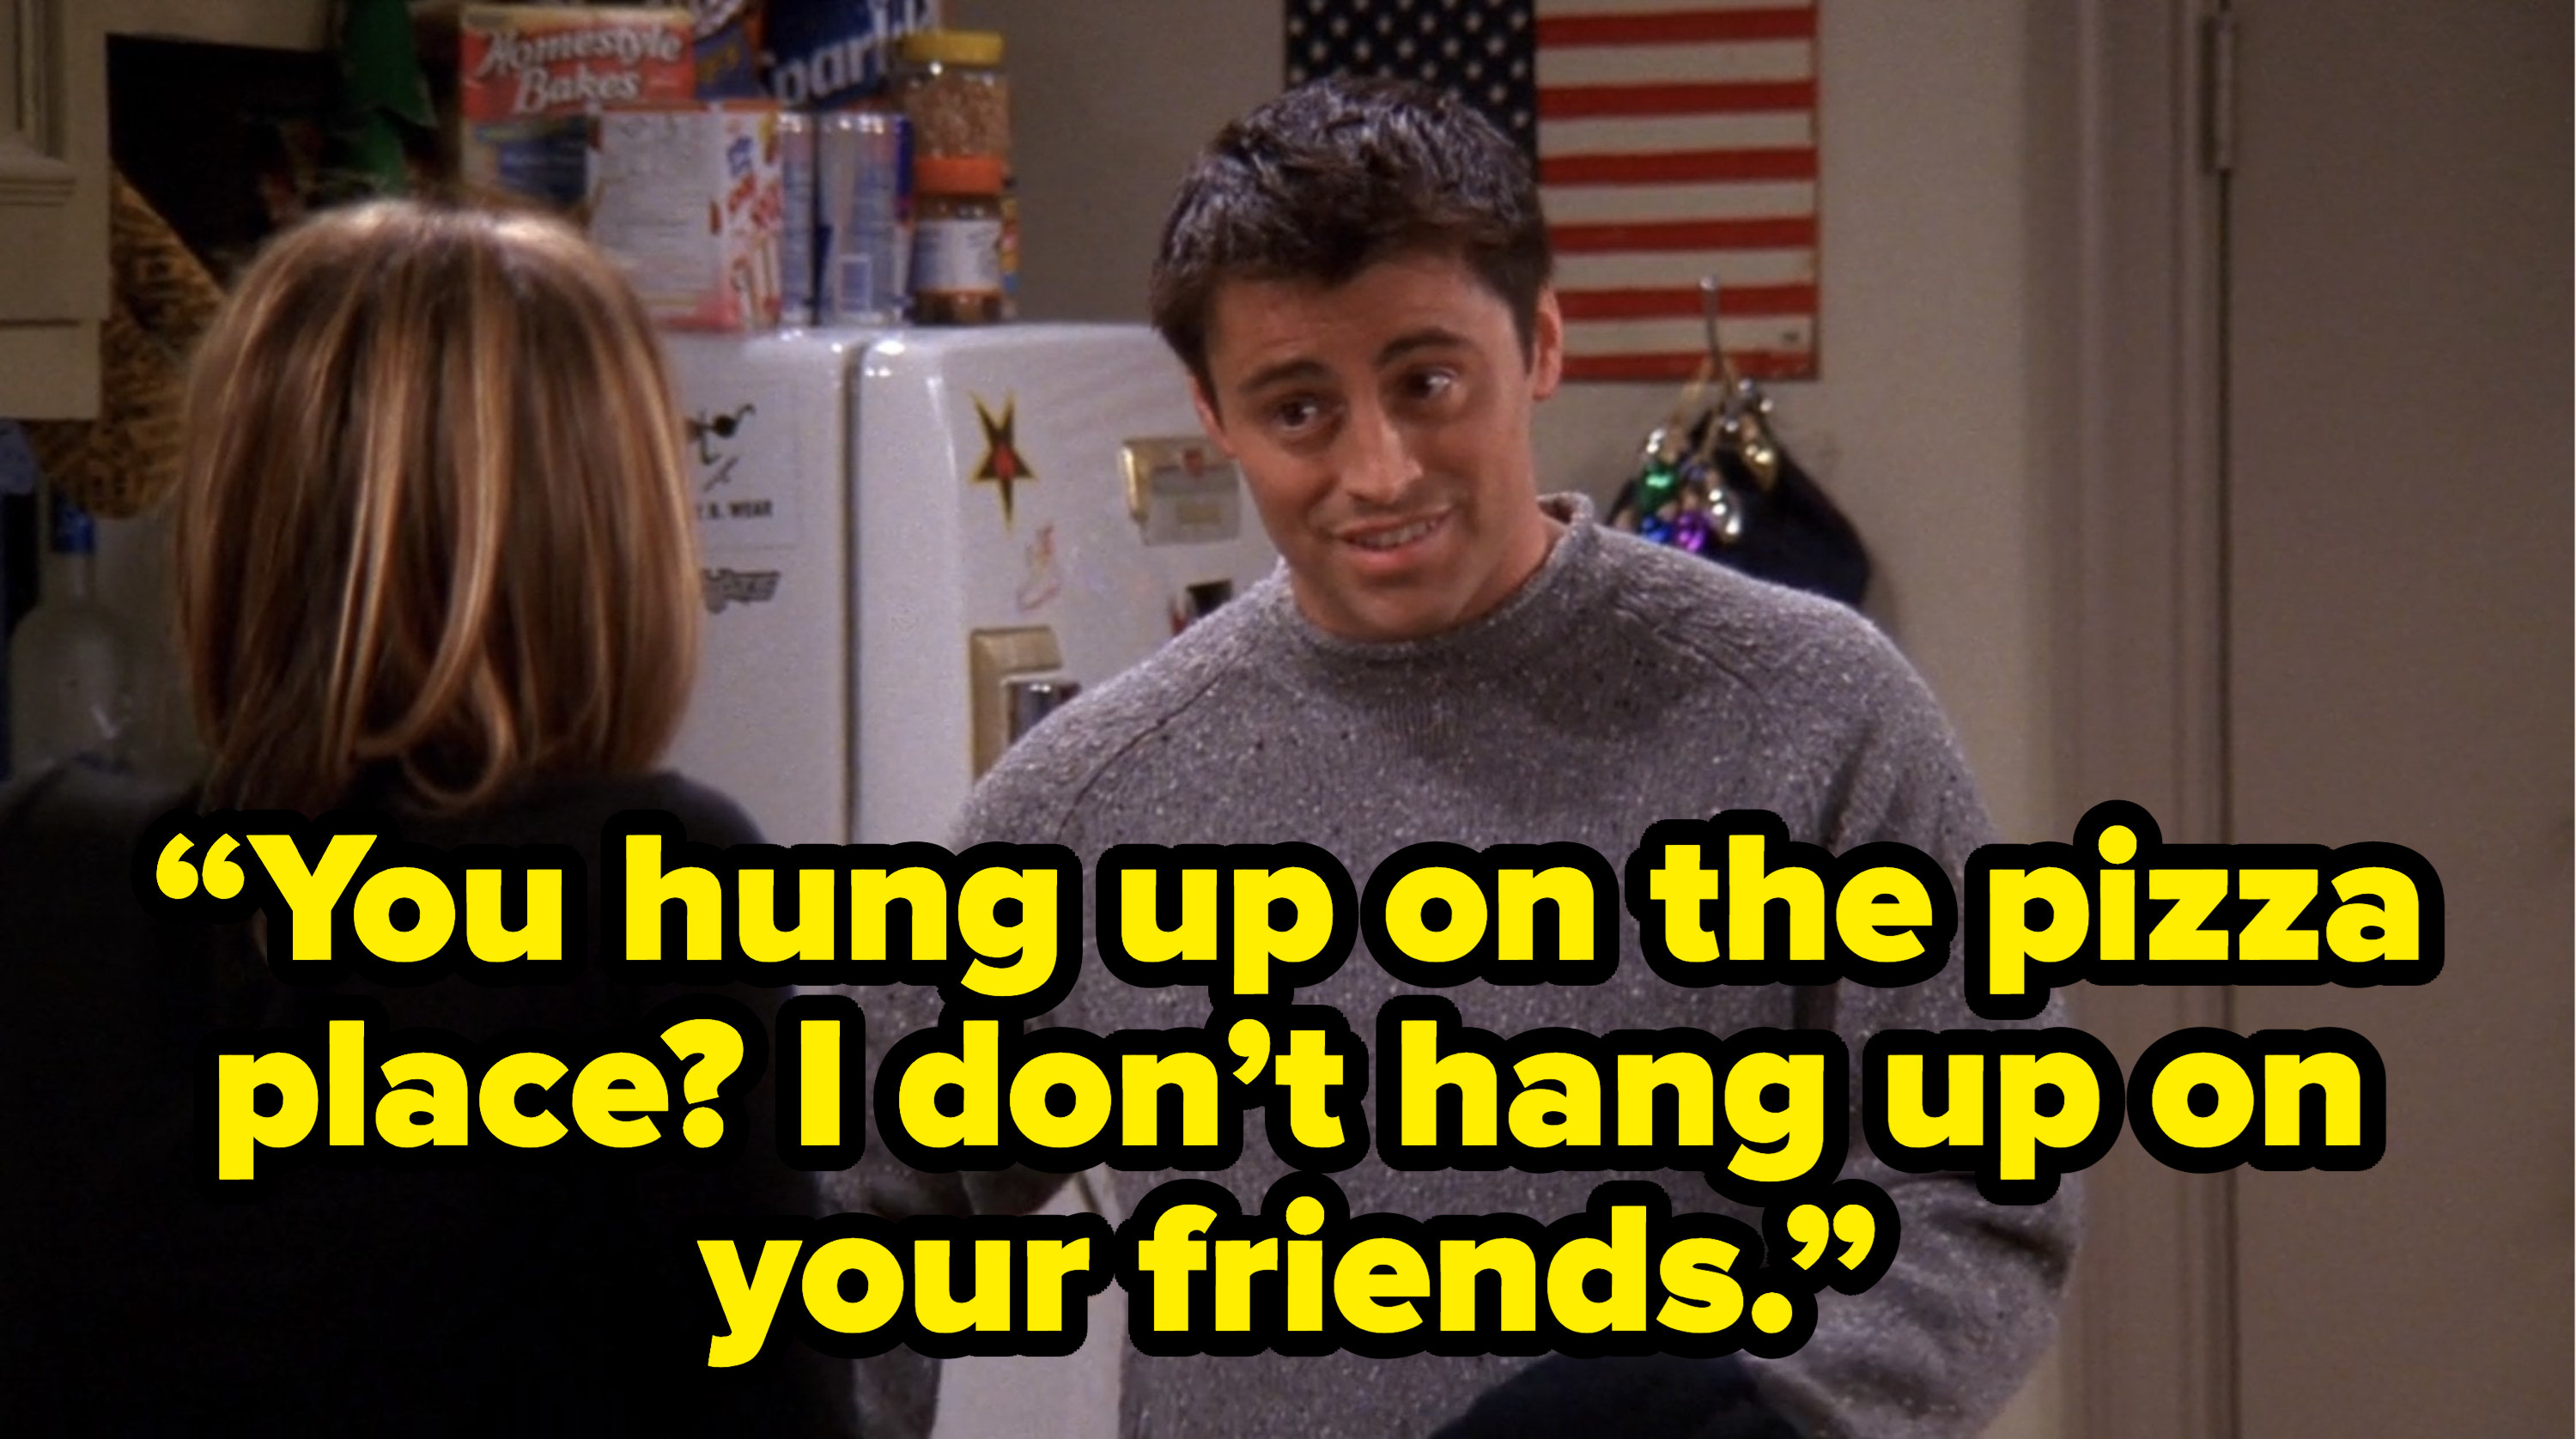 joey saying “You hung up on the pizza place? I don’t hang up on your friends.” on friends